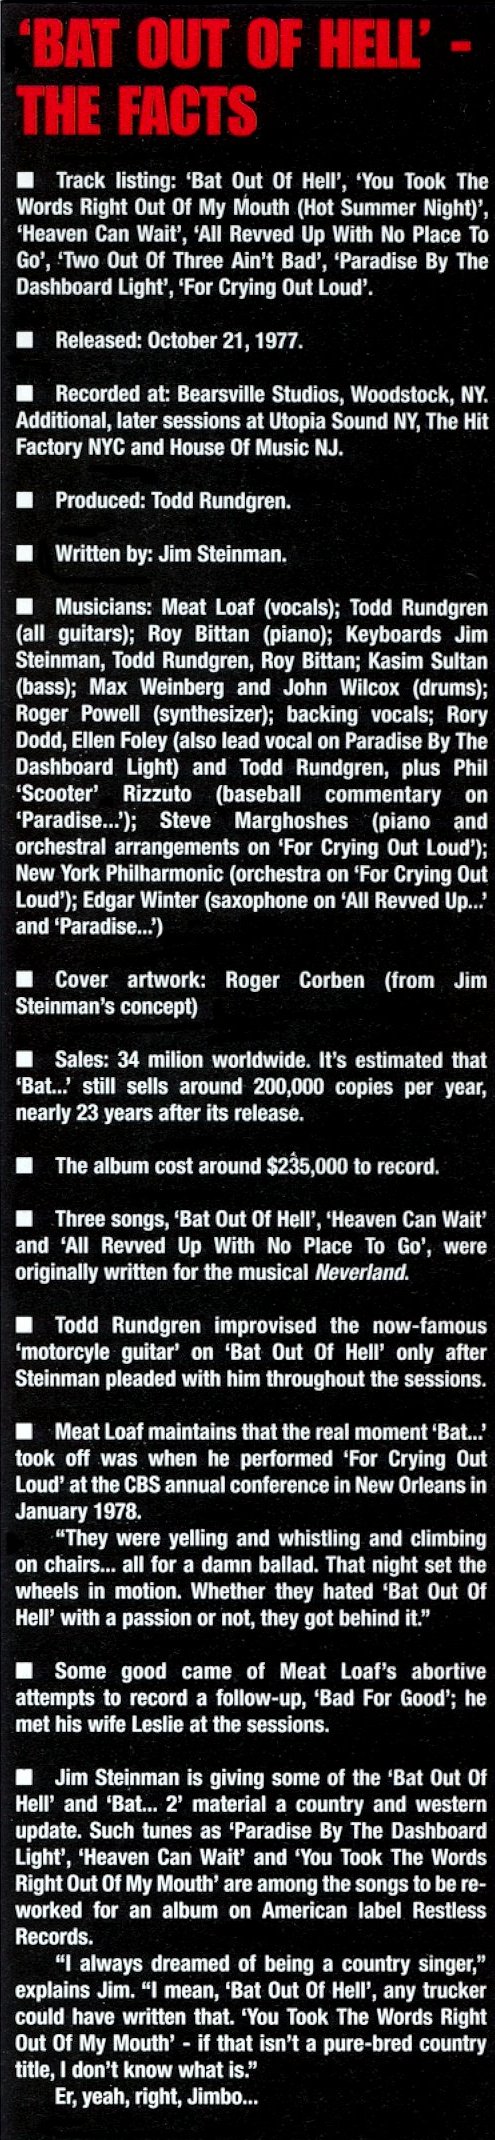 Bat Out Of Hell - The Facts (scan of magazine info box - text is below)